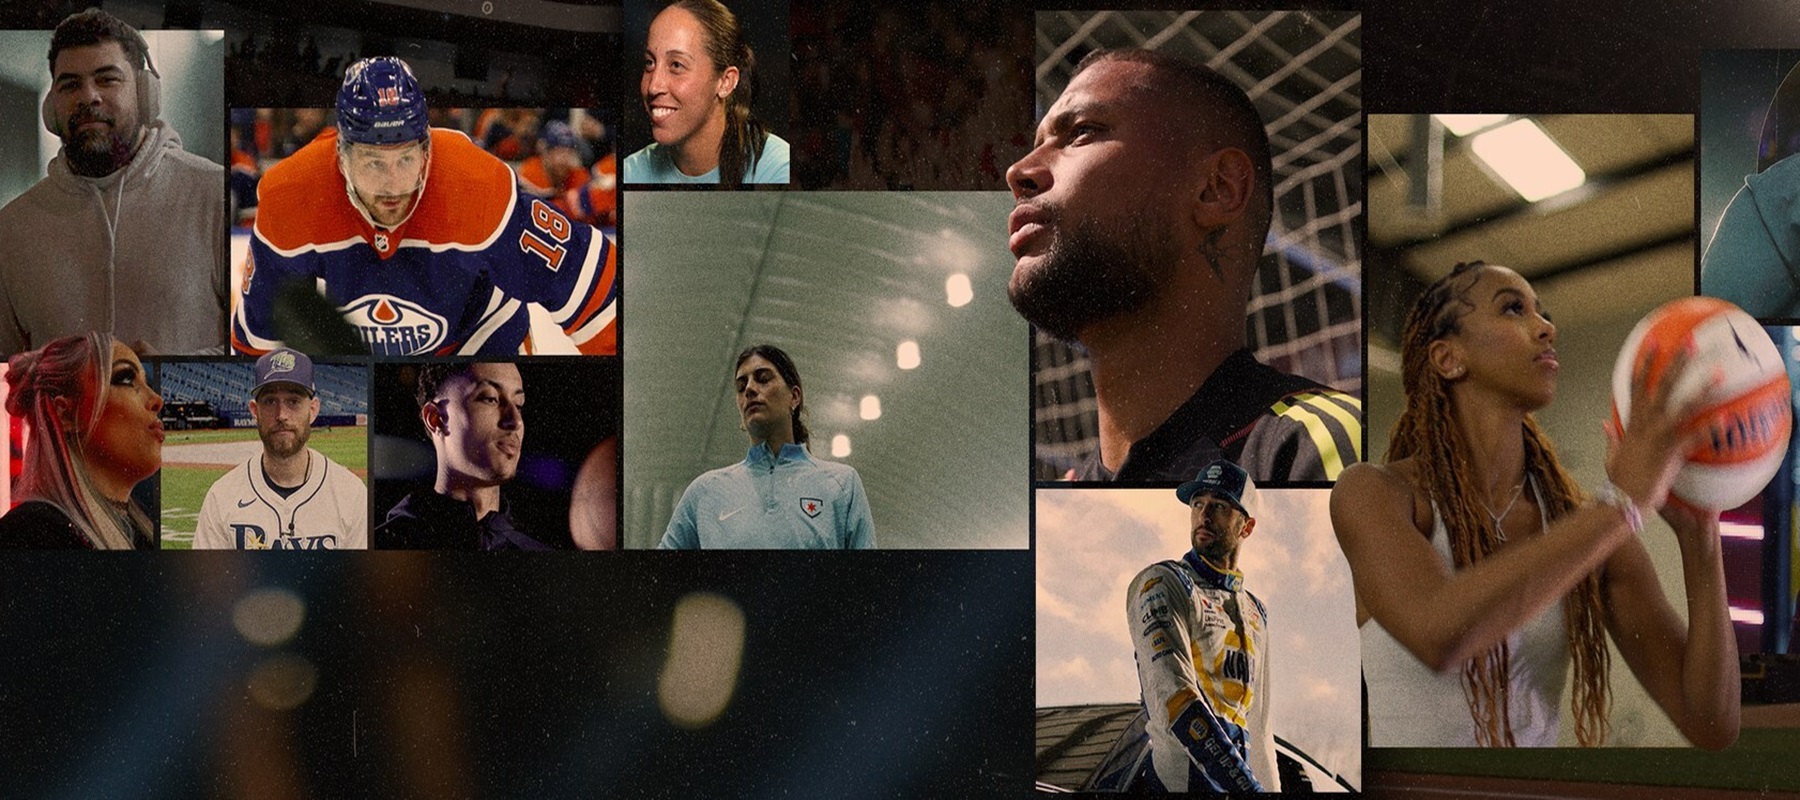 Star athletes encourage sports fans to prioritize their mental health in new campaign